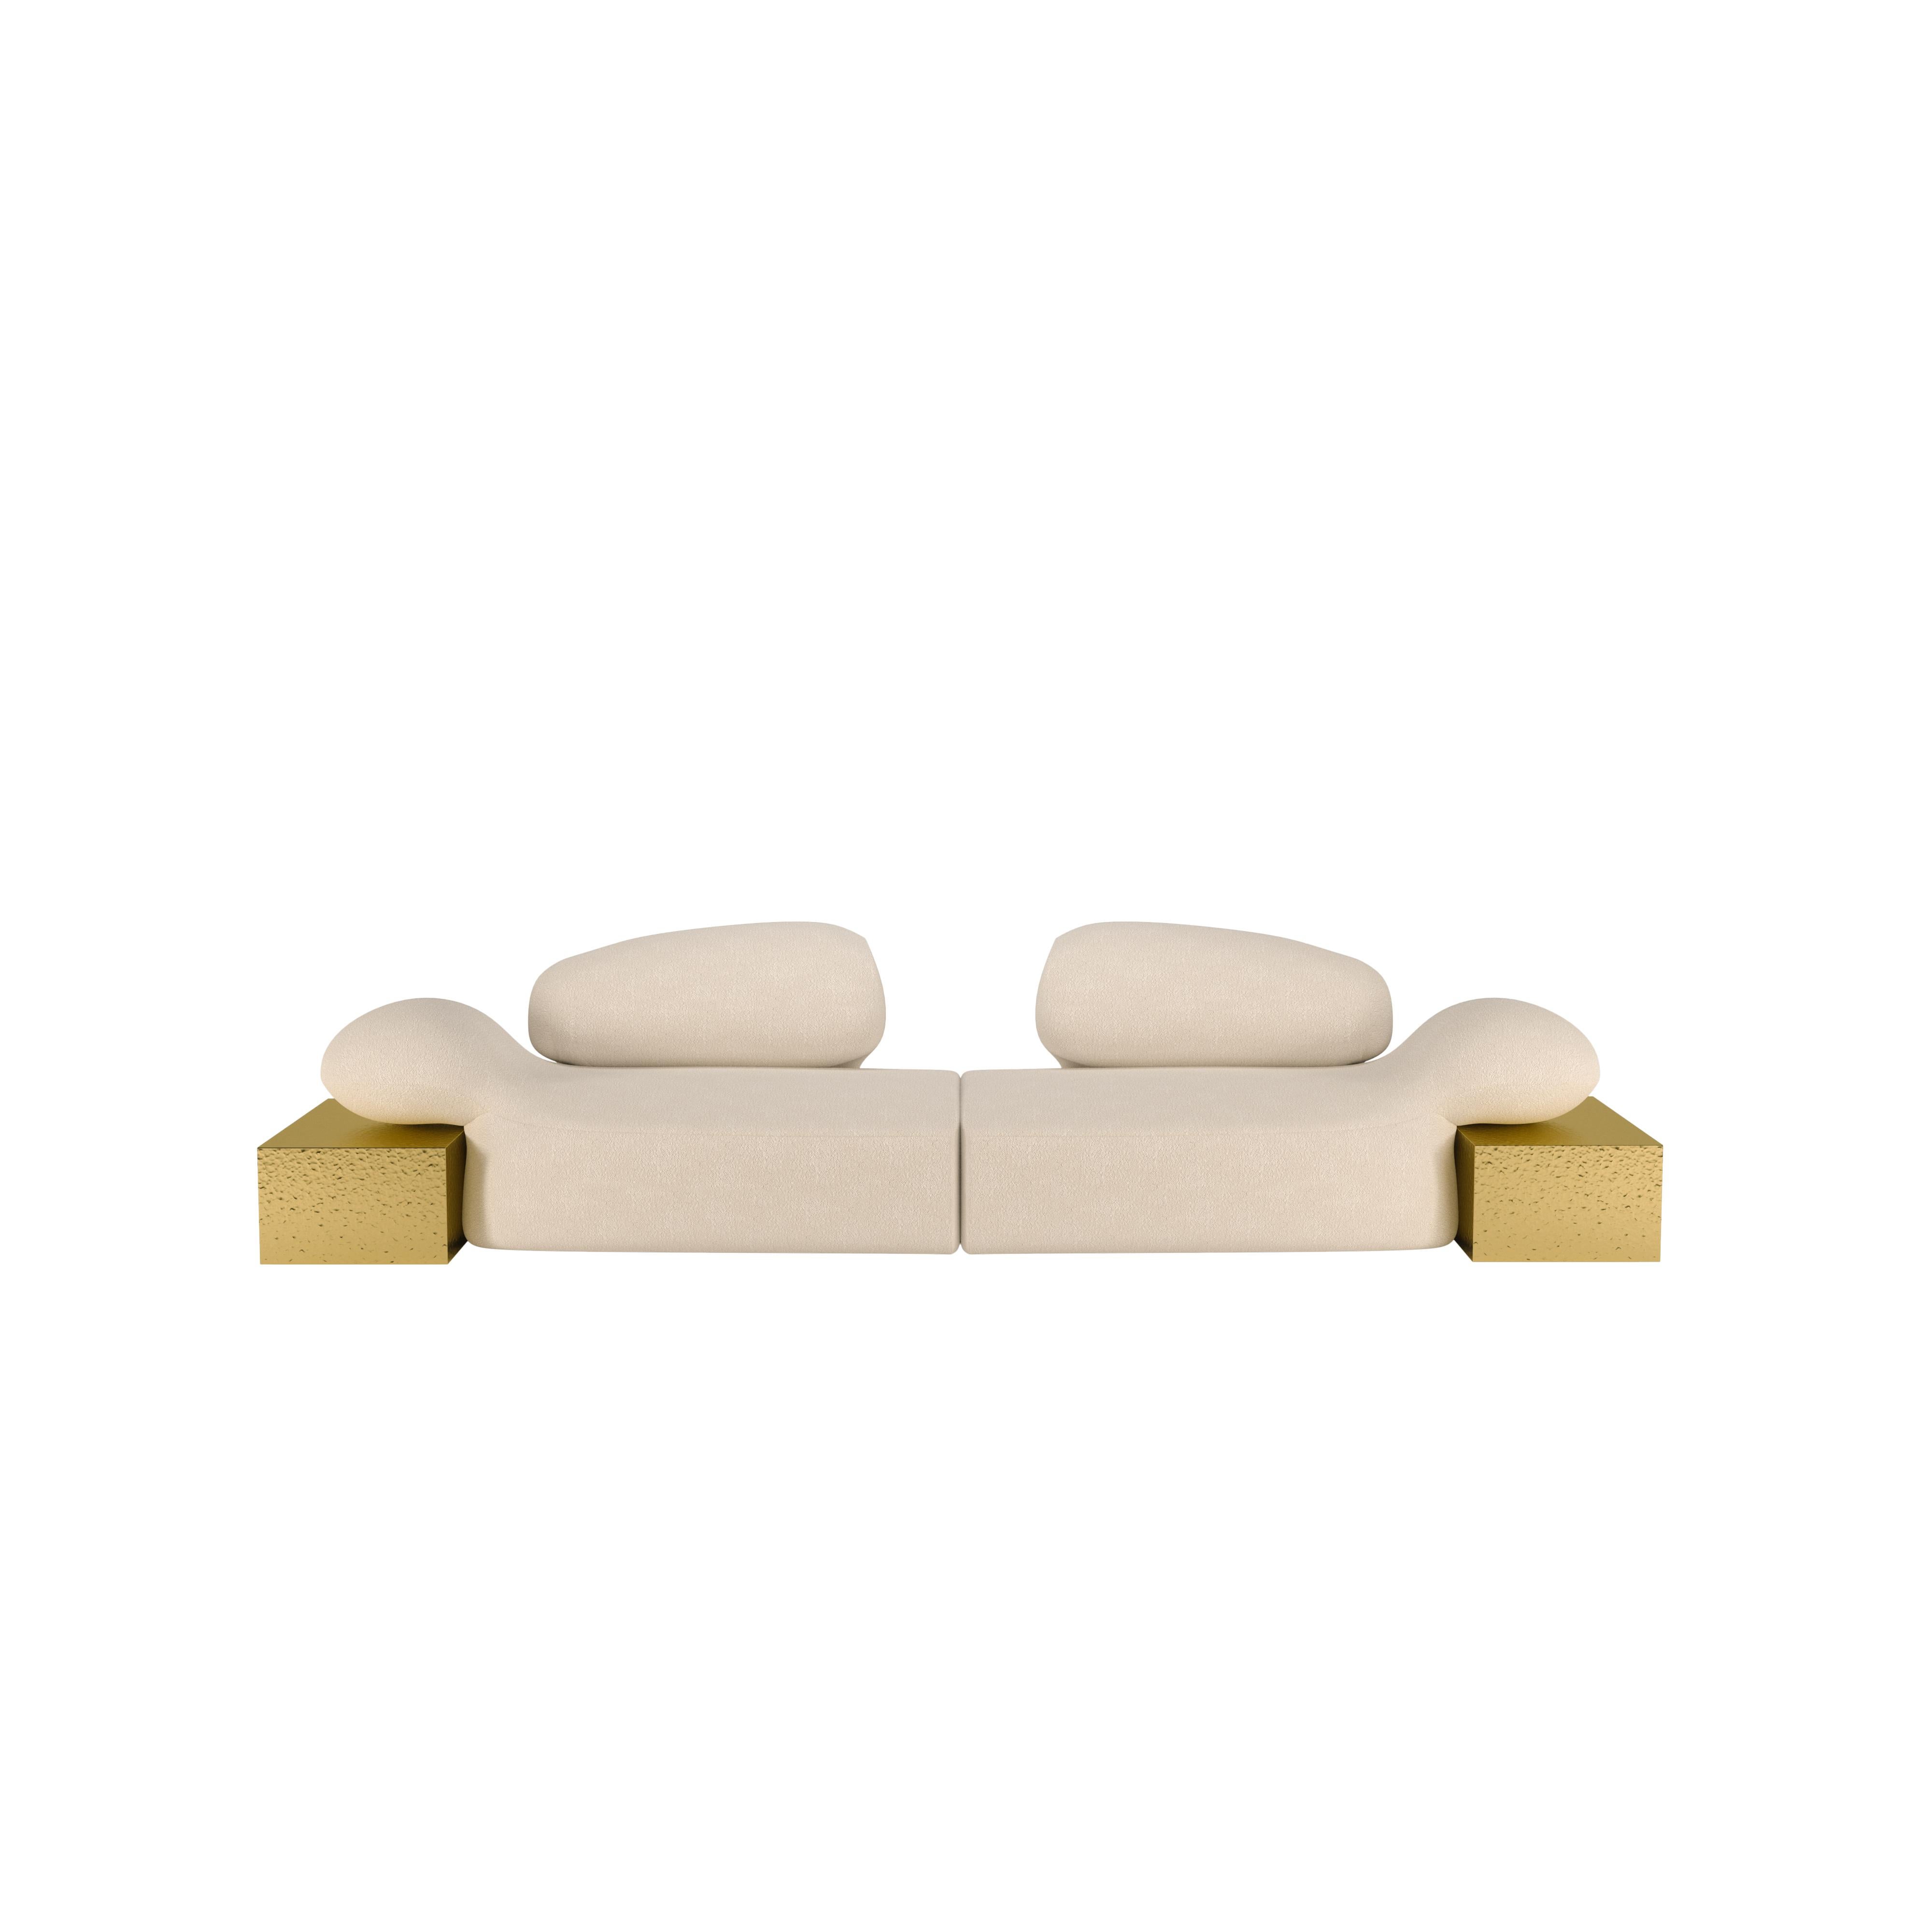 Against the minimalist design concept and characterized by a free use of color and shapes, the modernism movement sparks the impulse for Malabar designers to conceive this future classic sofa.

Within this artistic-flavored space, the Viv Id sofa